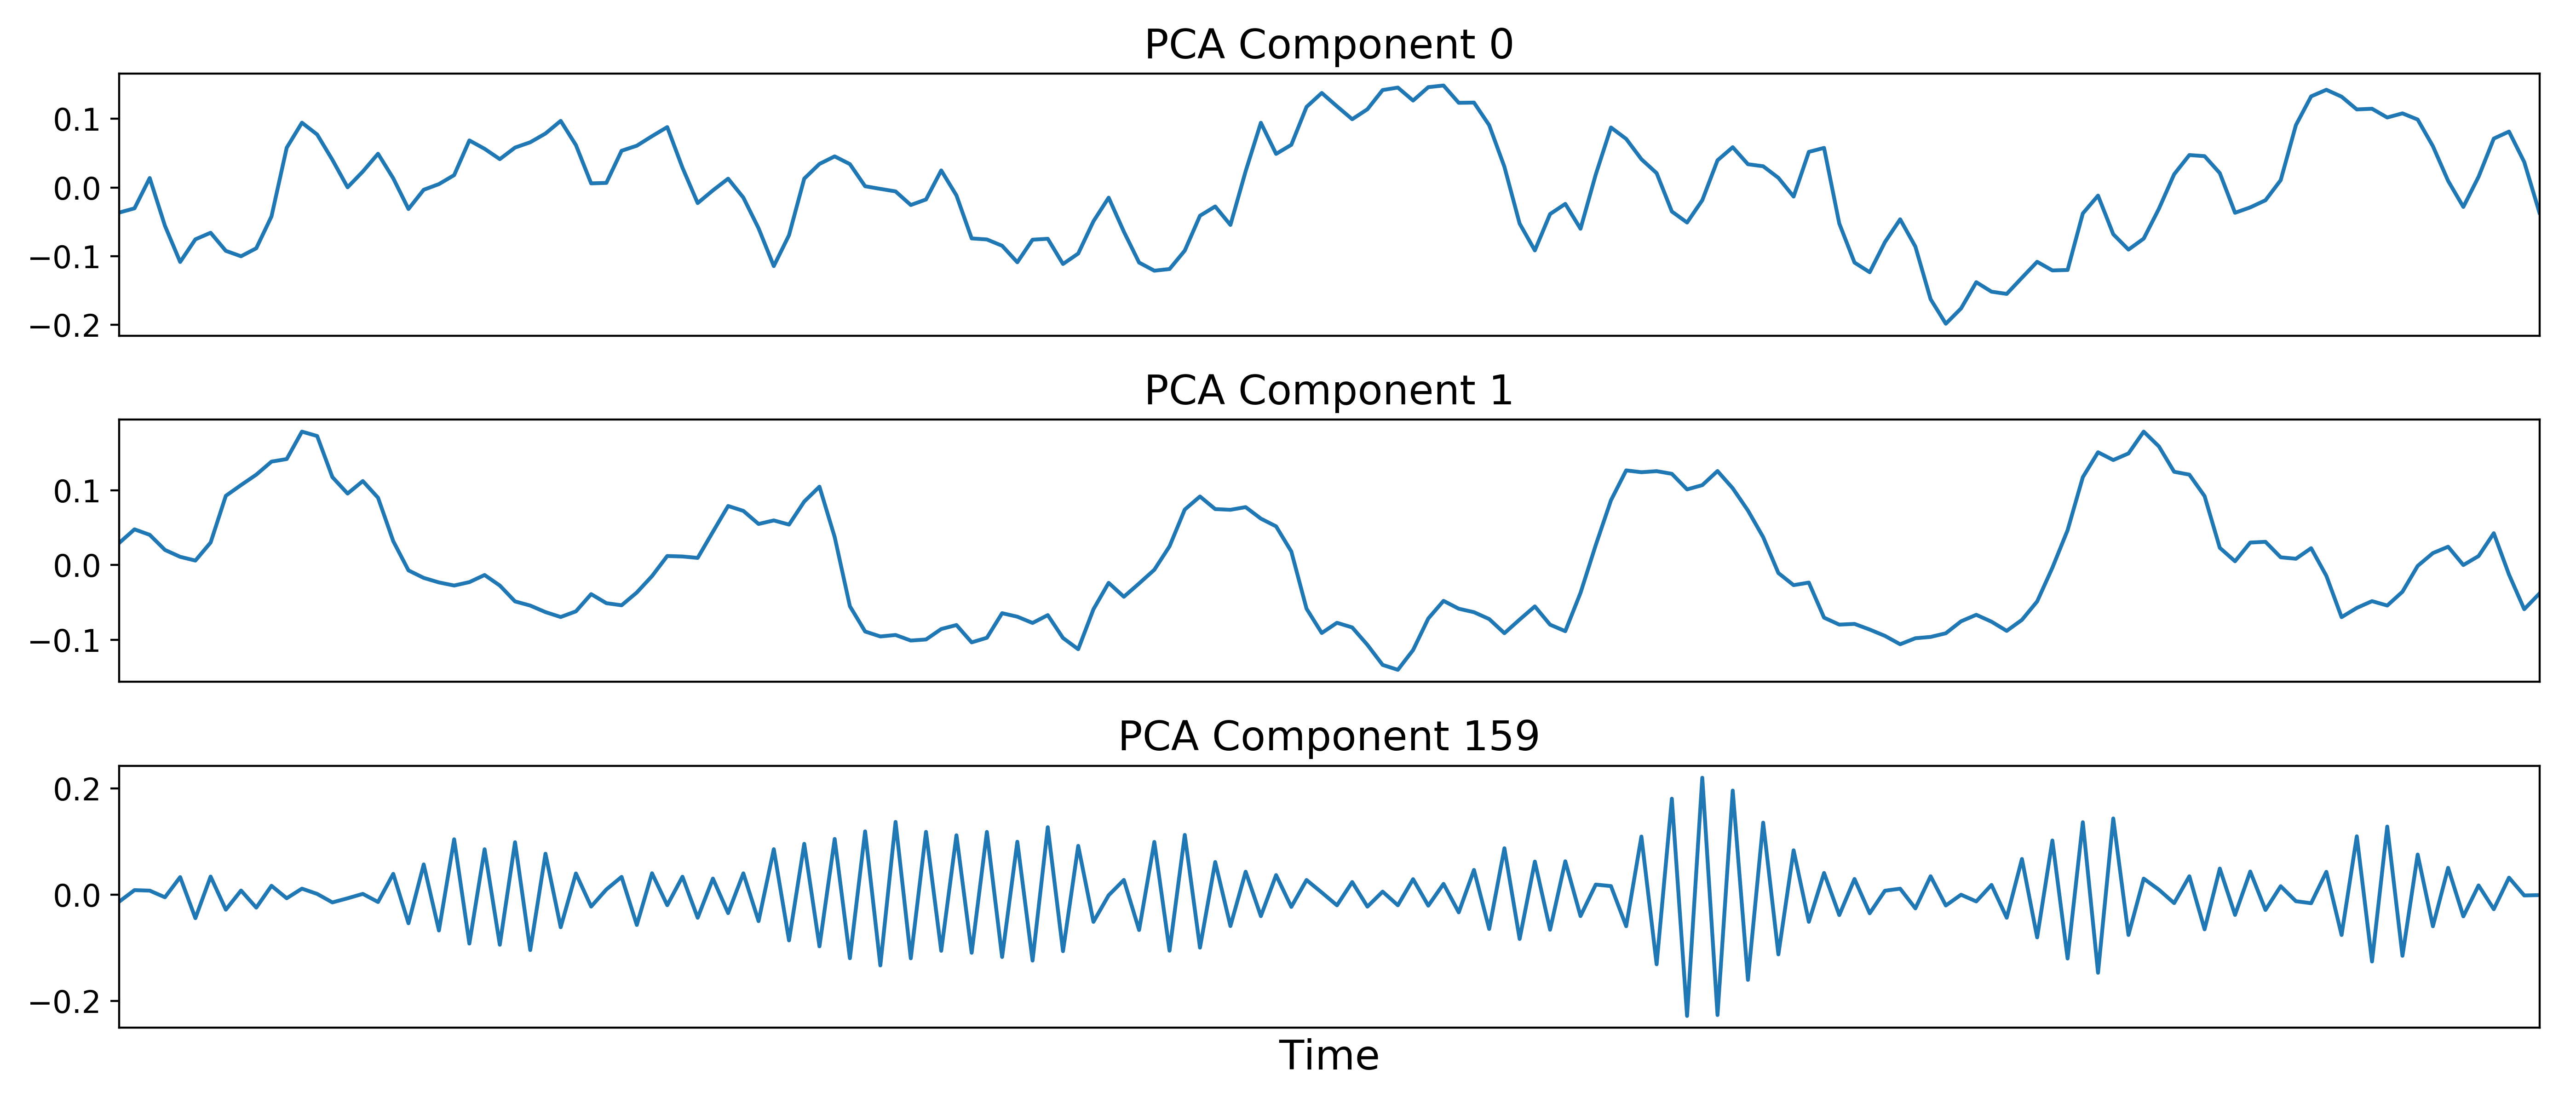 _images/11_pca_component_timeseries.png